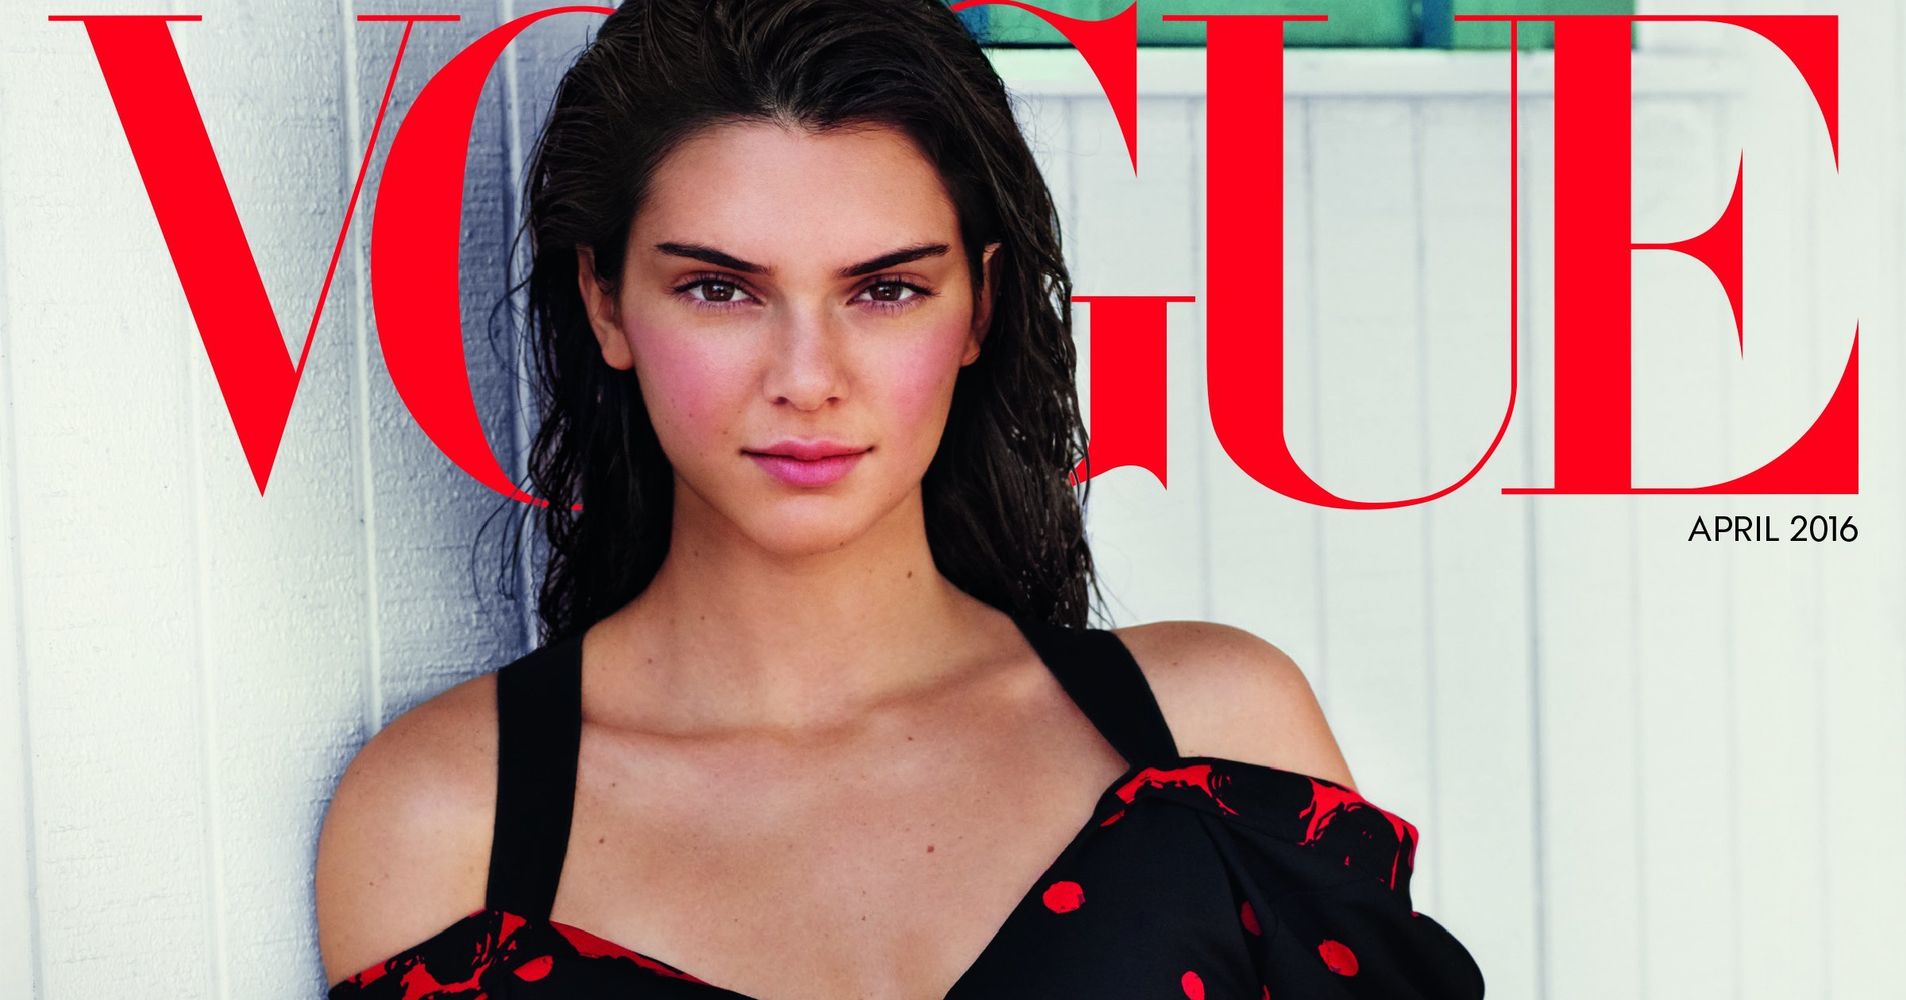 Kendall Jenner Rides A Horse In Her Underwear To Promote Her Brand ...